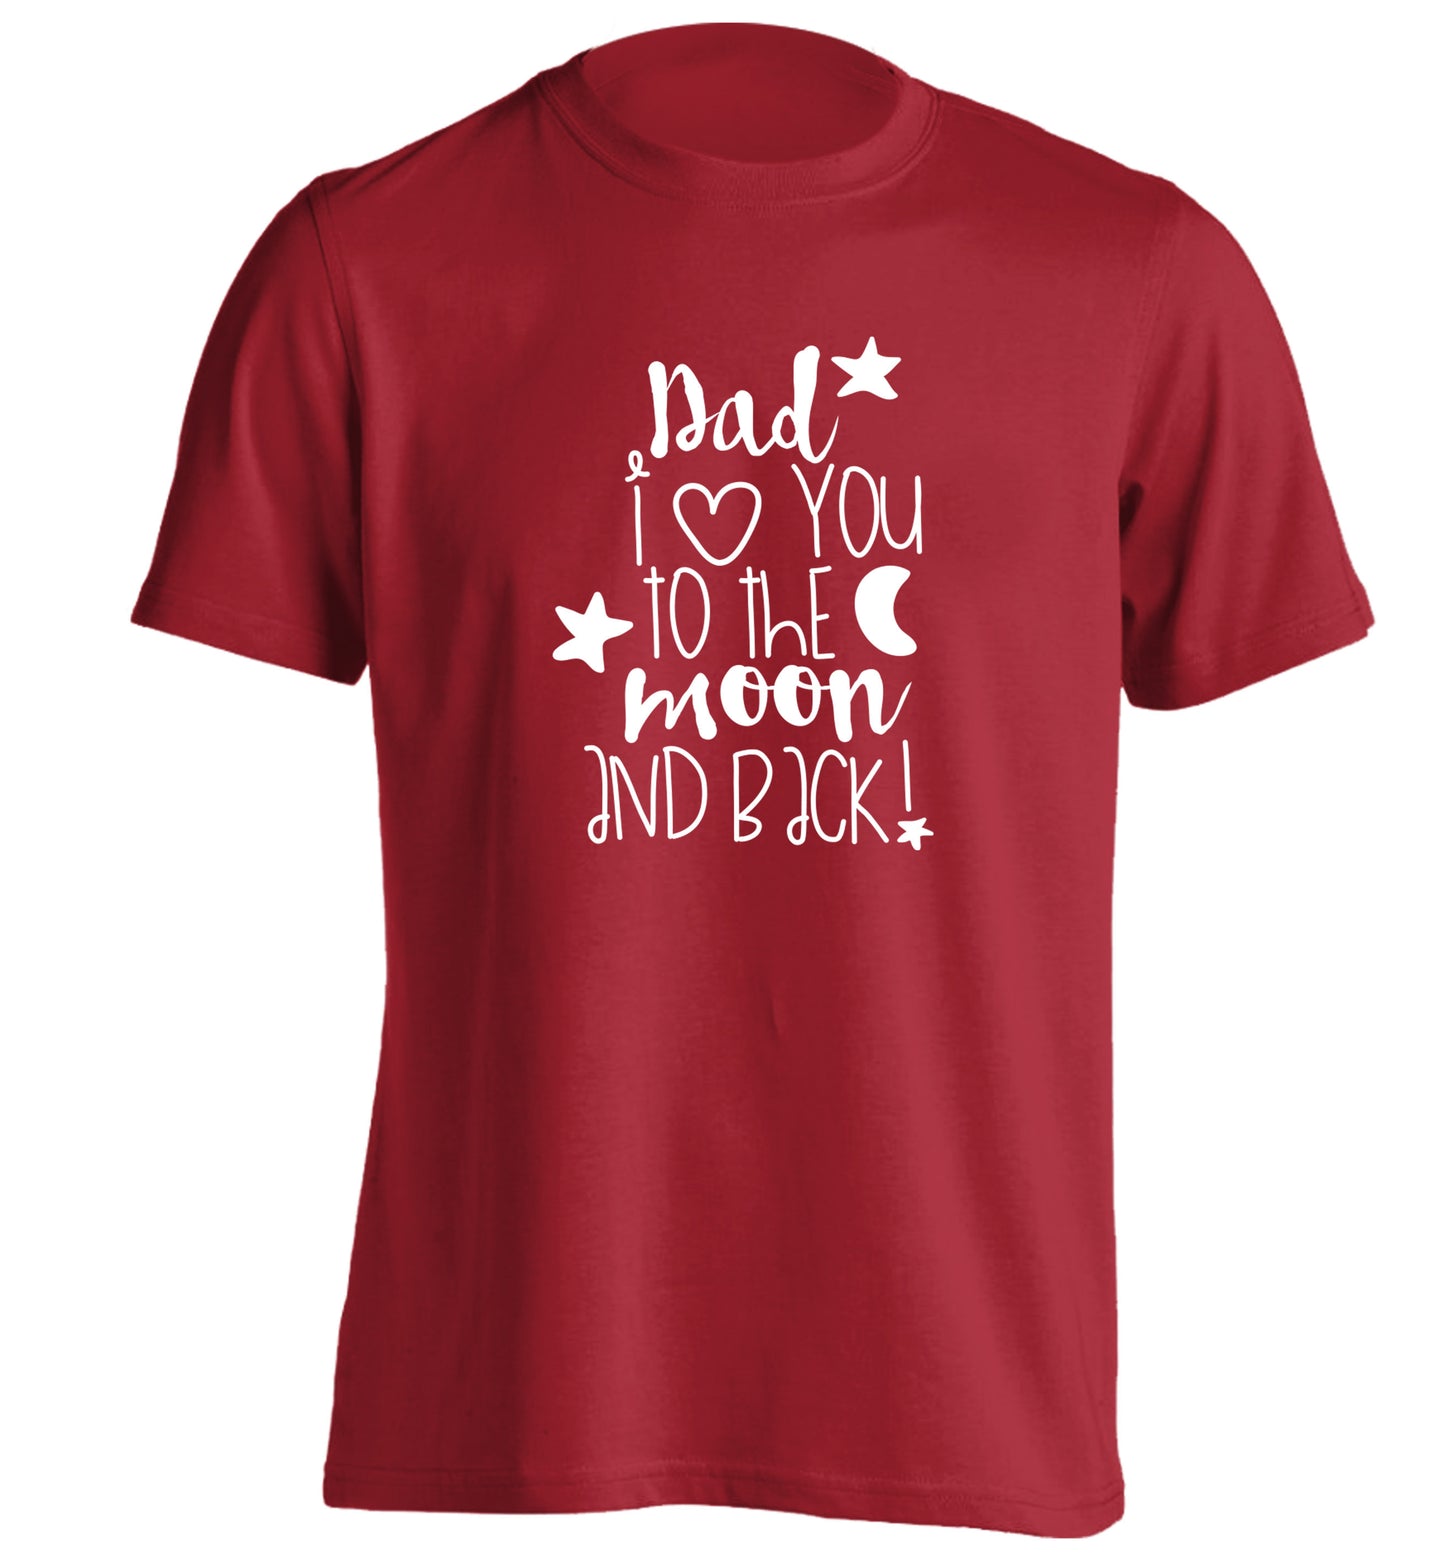 Dad I love you to the moon and back adults unisex red Tshirt 2XL